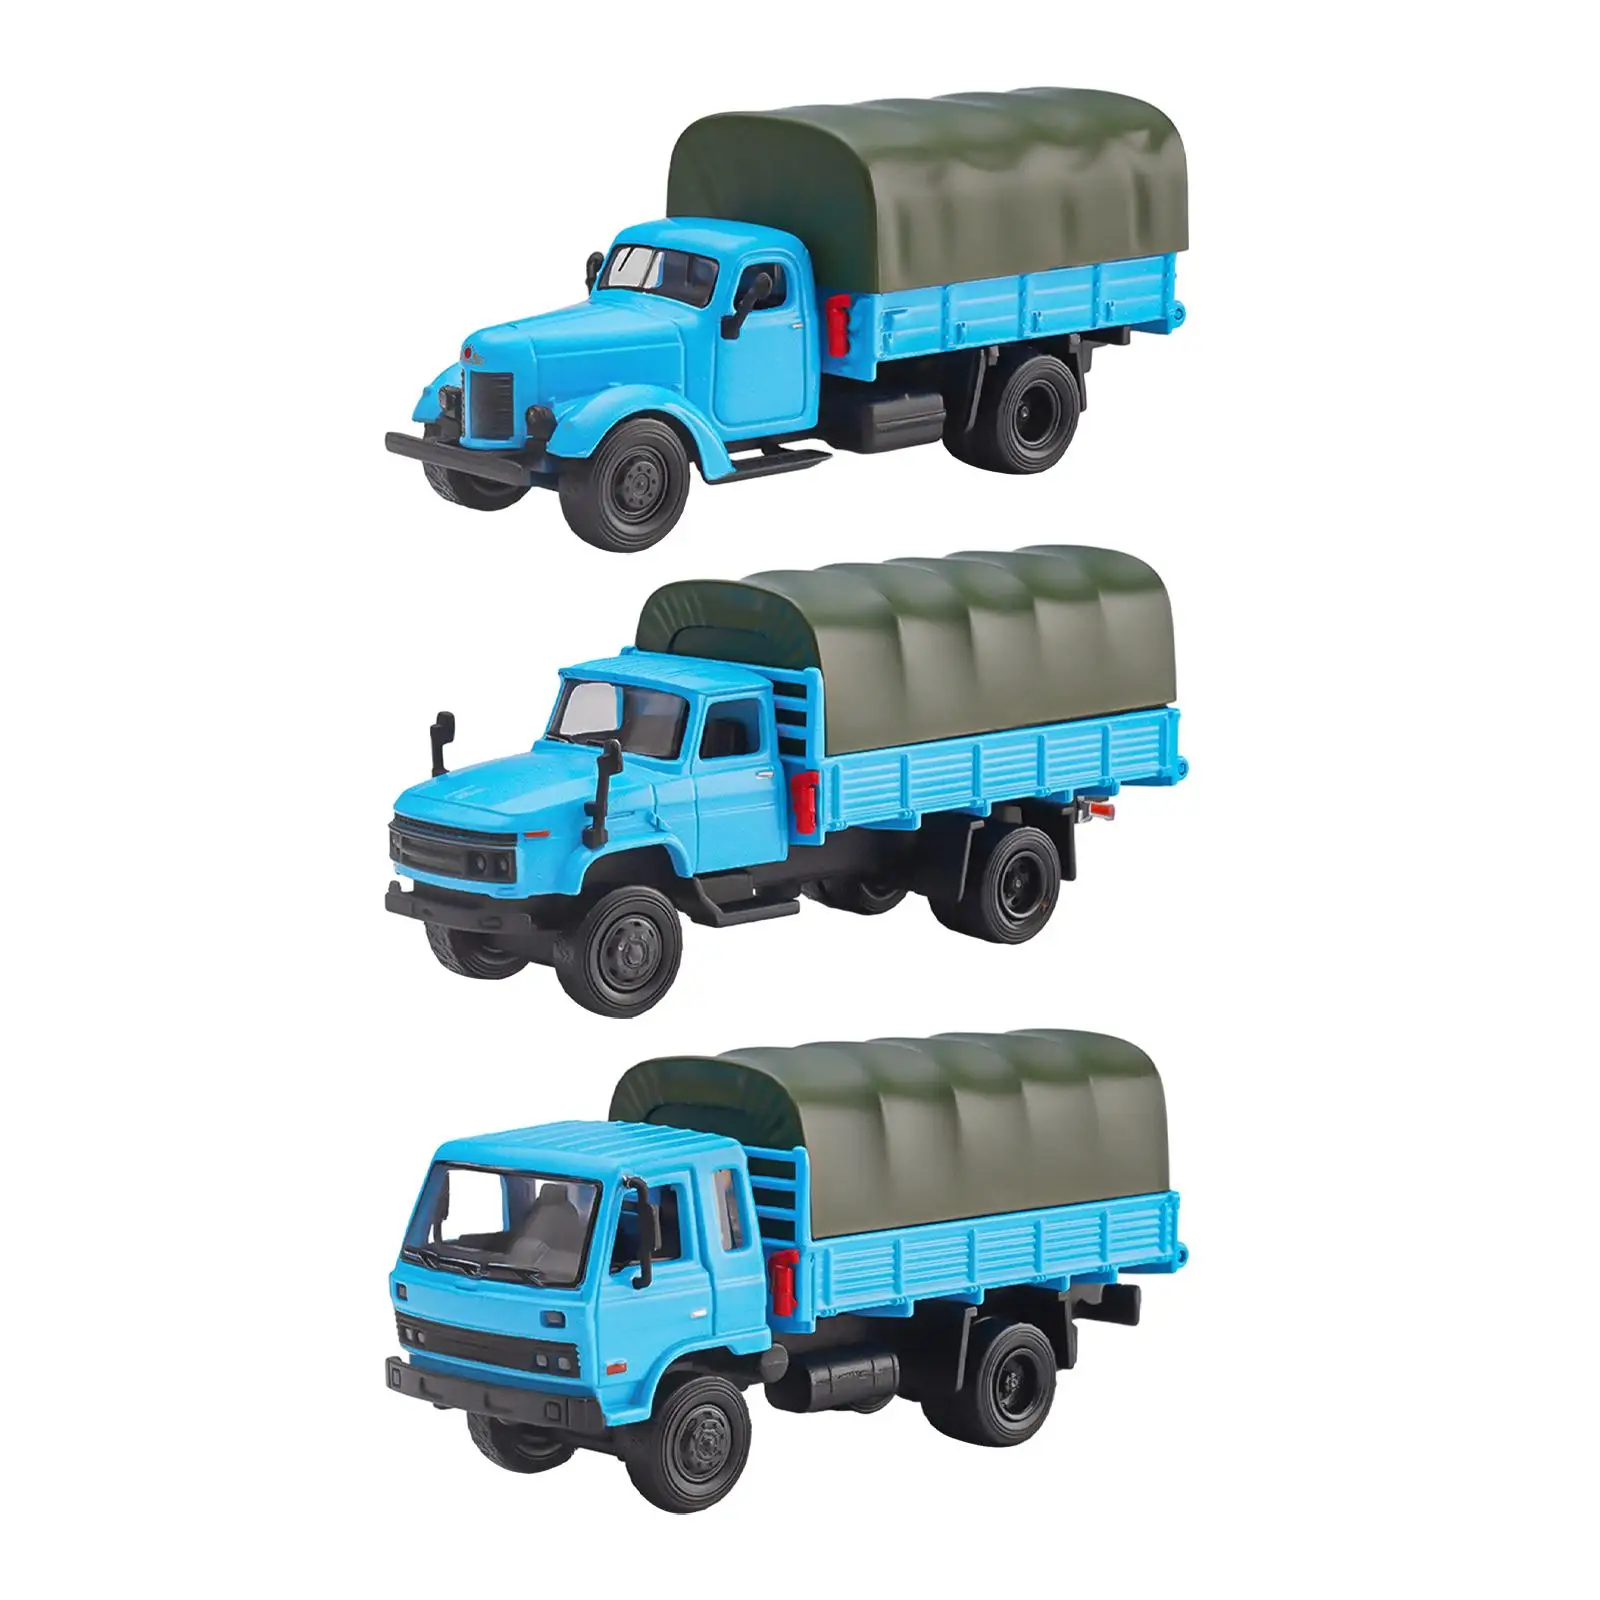 Metal Diecast Truck Desktop Ornament Hand Painted Road Diorama Scenery Movie Props 1:64 Transport Truck for Kids Adults Decor